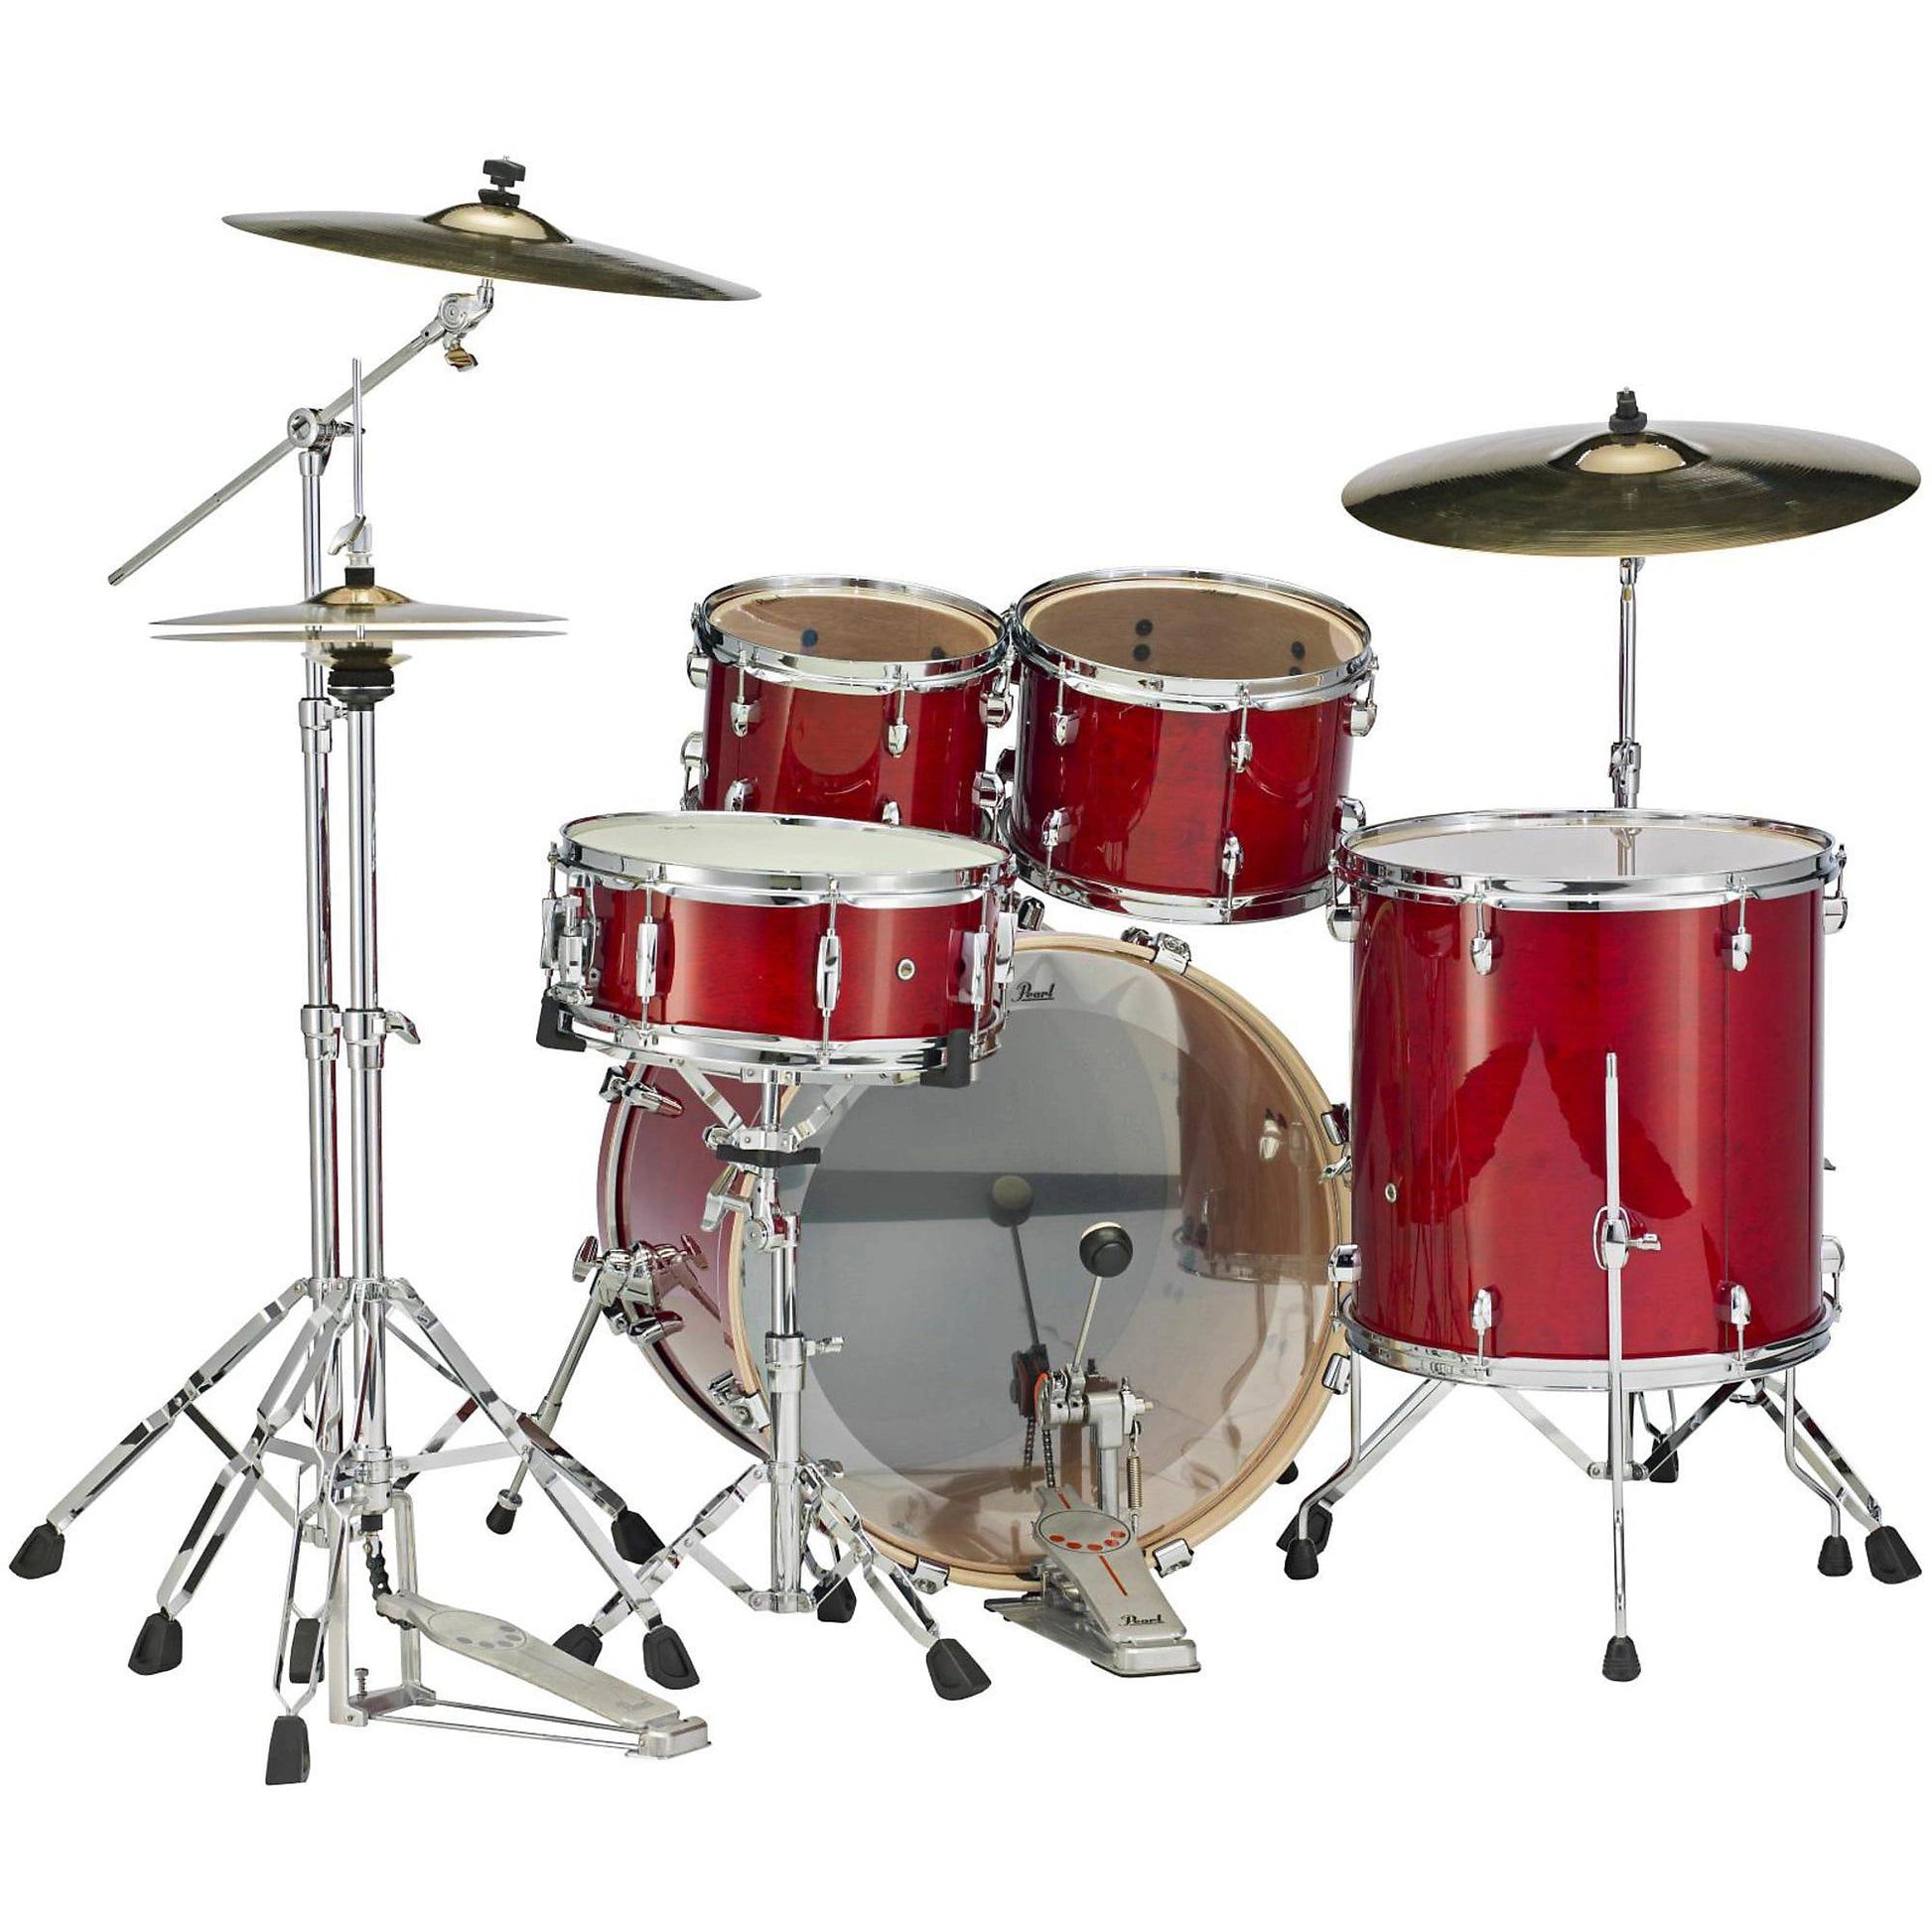 Trống Cơ Pearl Export Lacquer EXL725SP/C - Việt Music